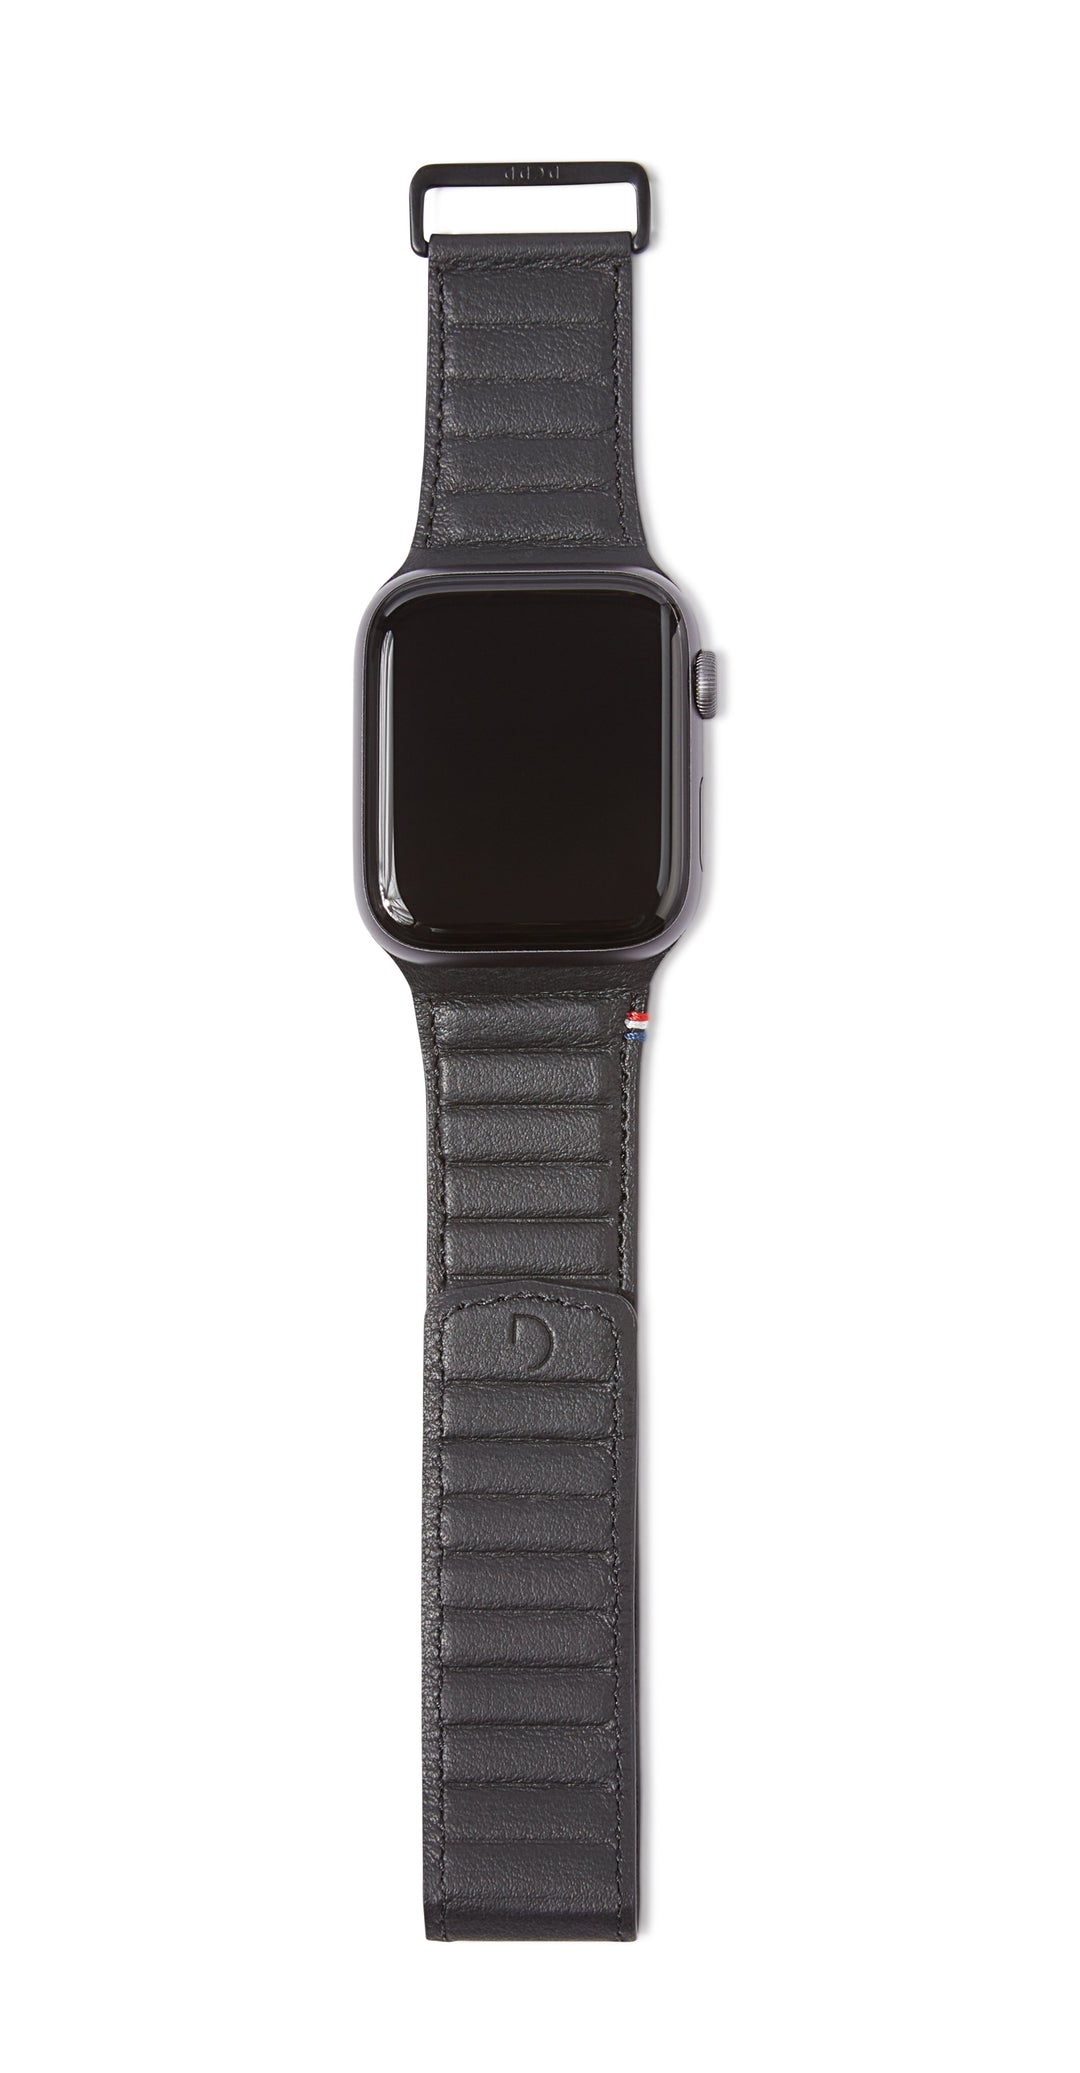 Leather Magnetic Traction Strap Apple Watch 42mm, Black